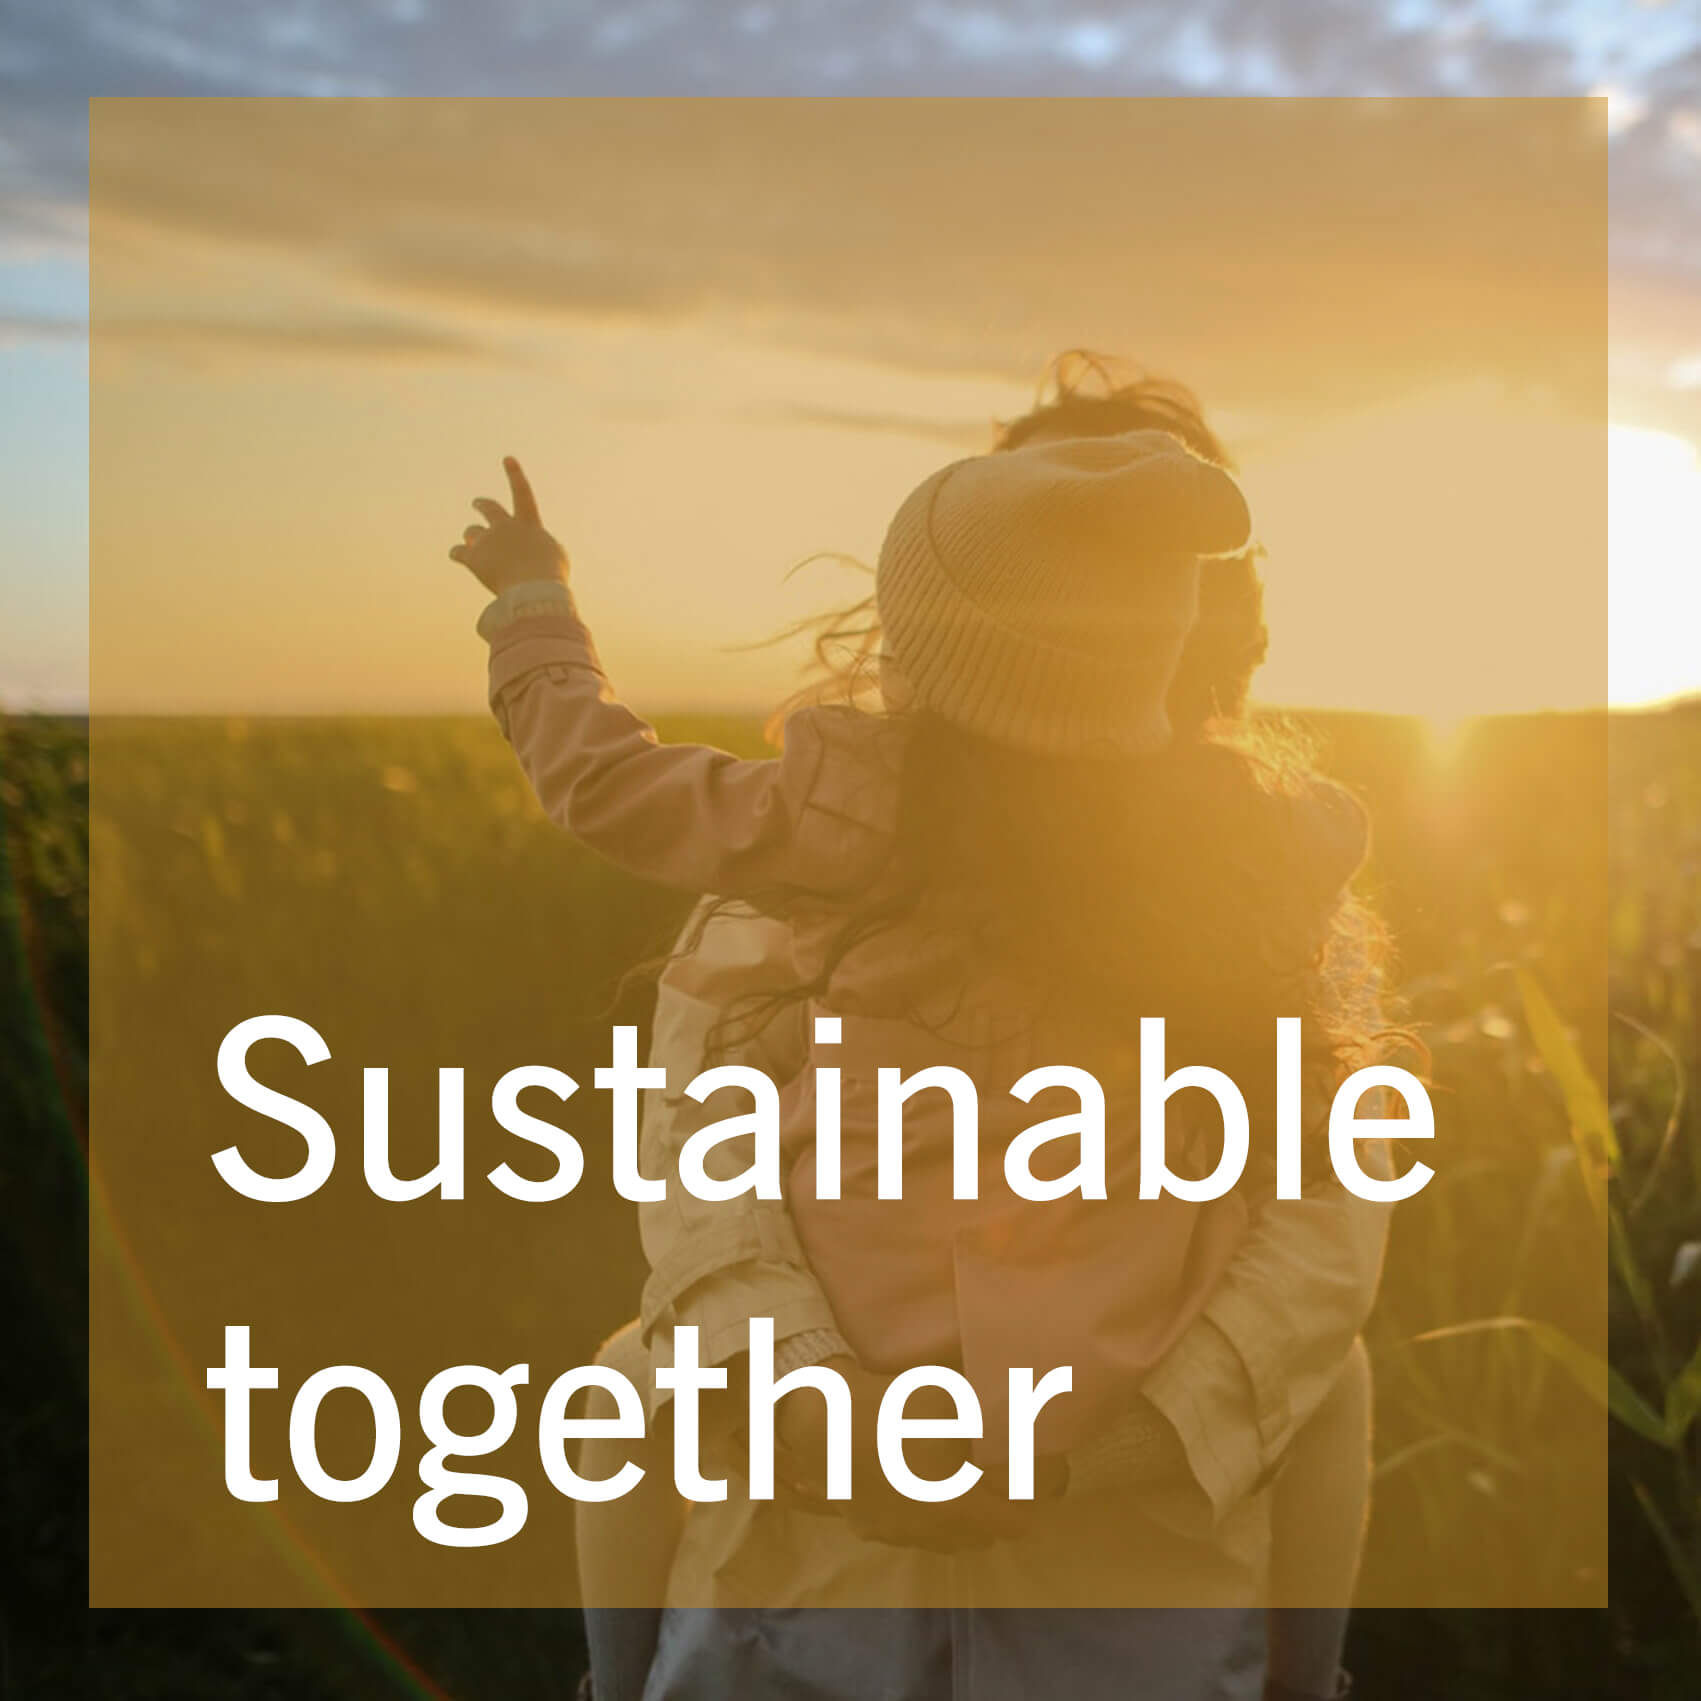 Sustainable together